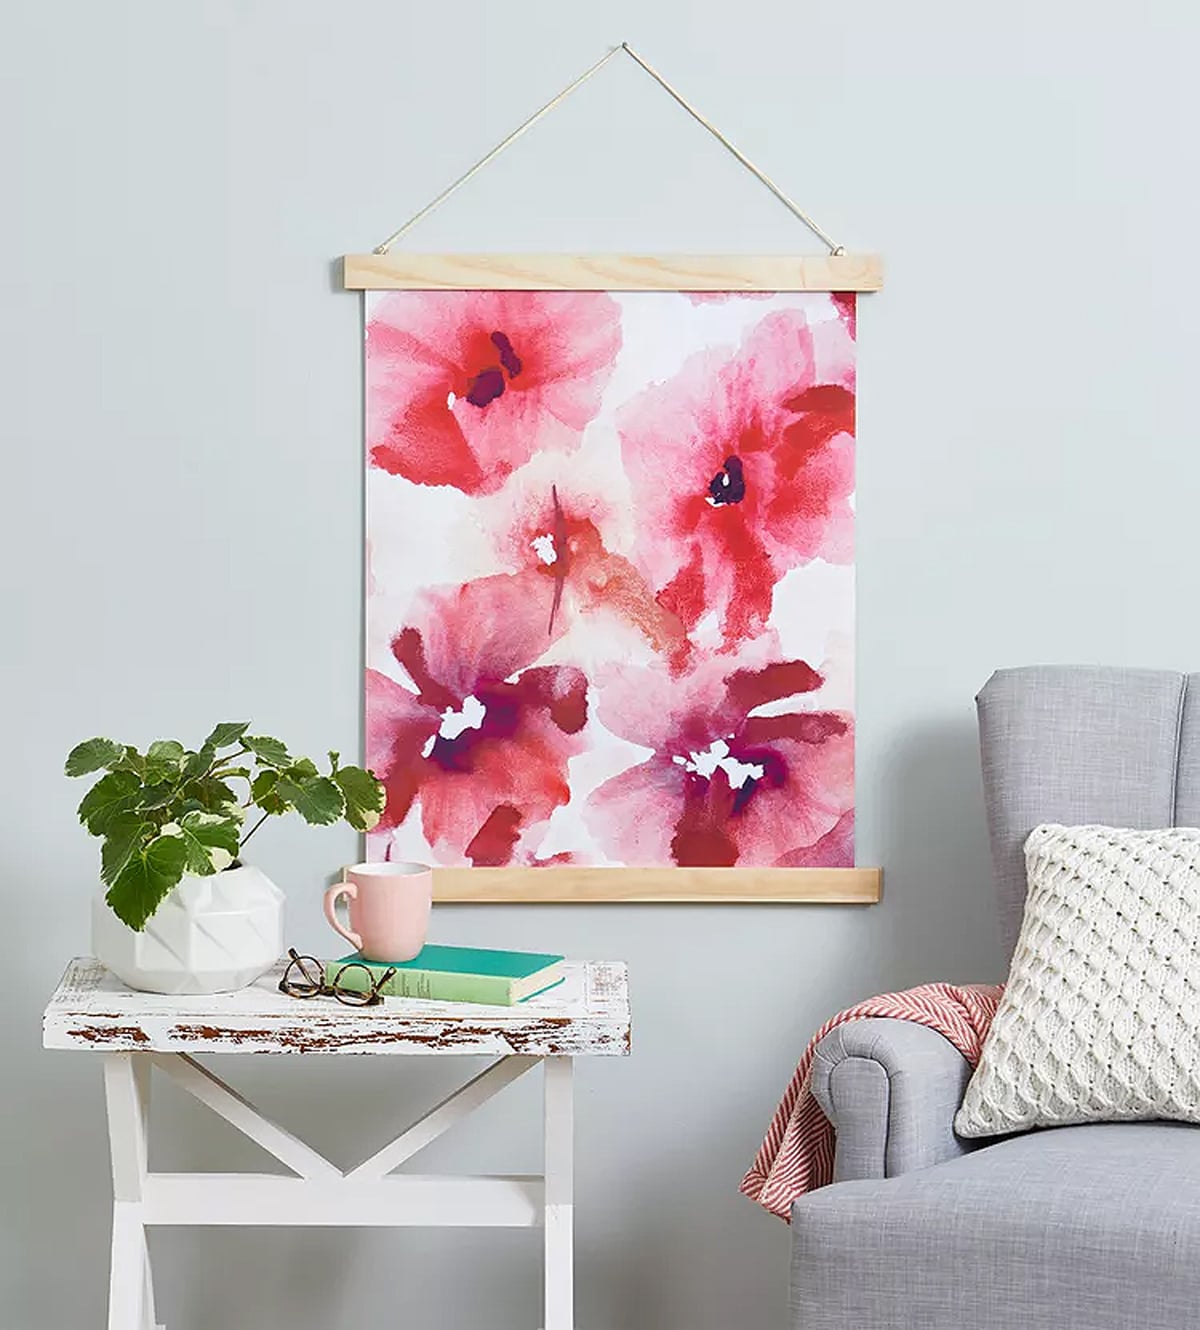 flower poster hanging on wall